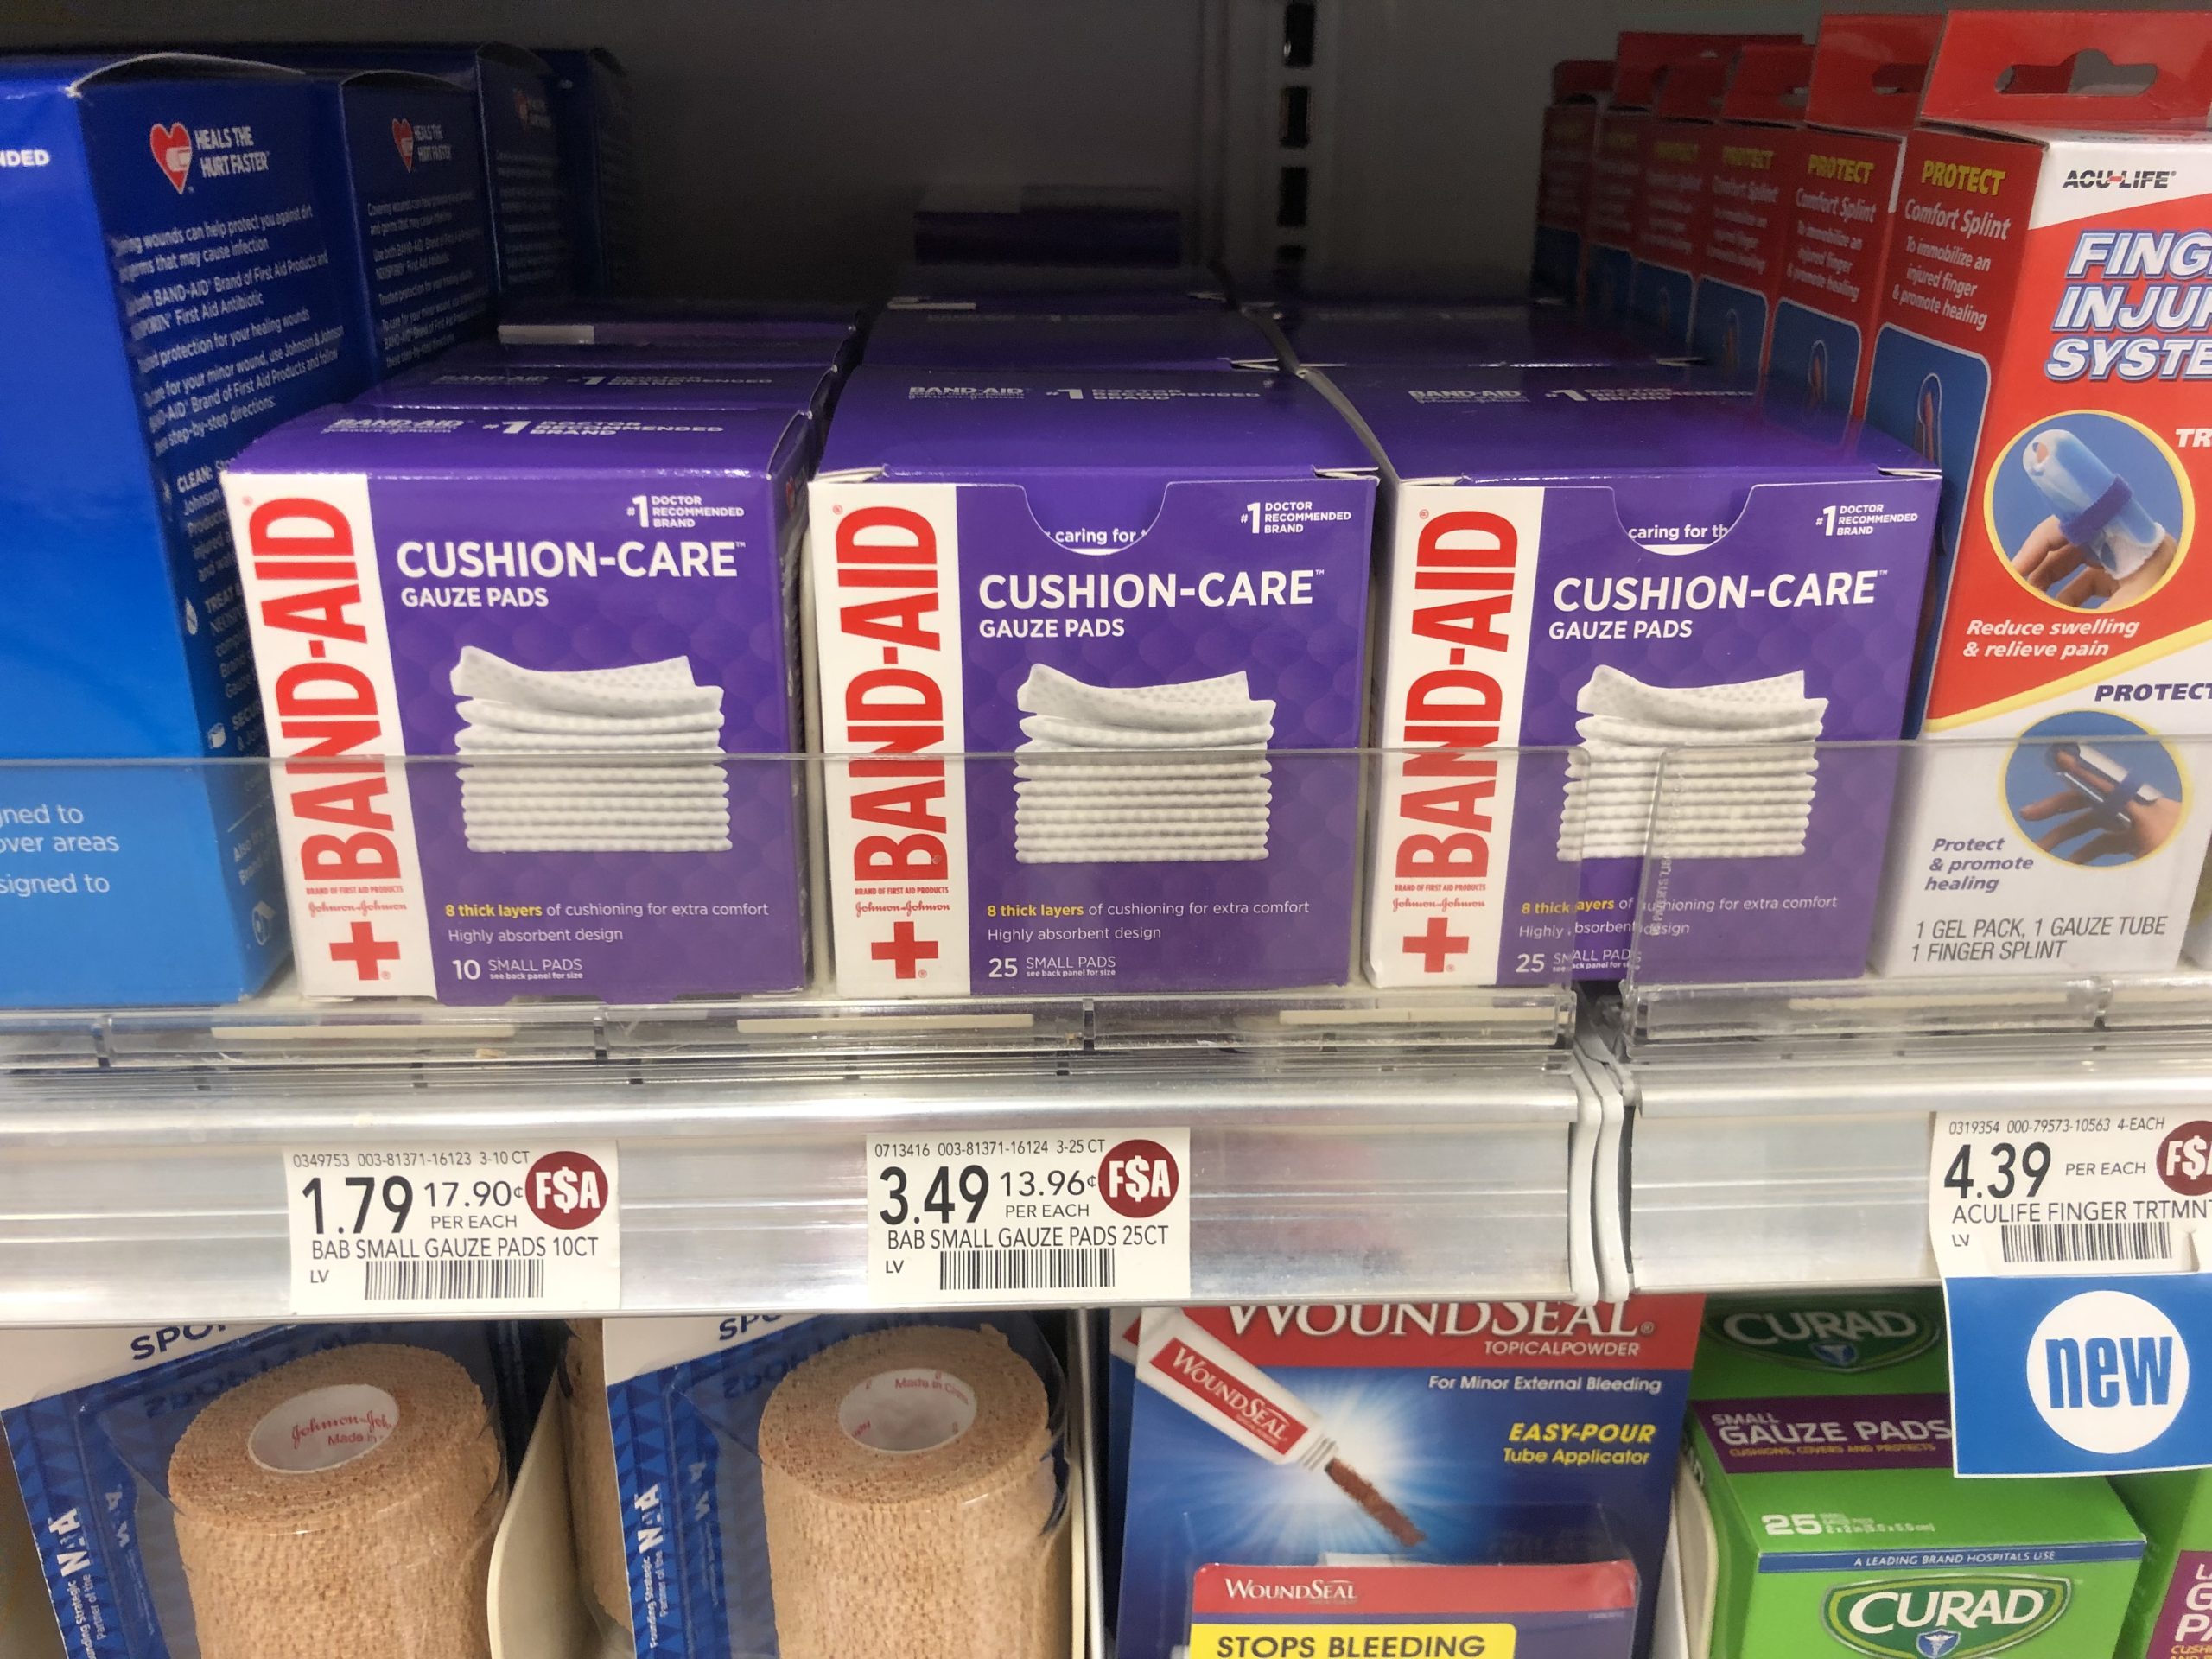 Band-Aid Brand First Aid Covers Just 4¢ At Publix on I Heart Publix 1